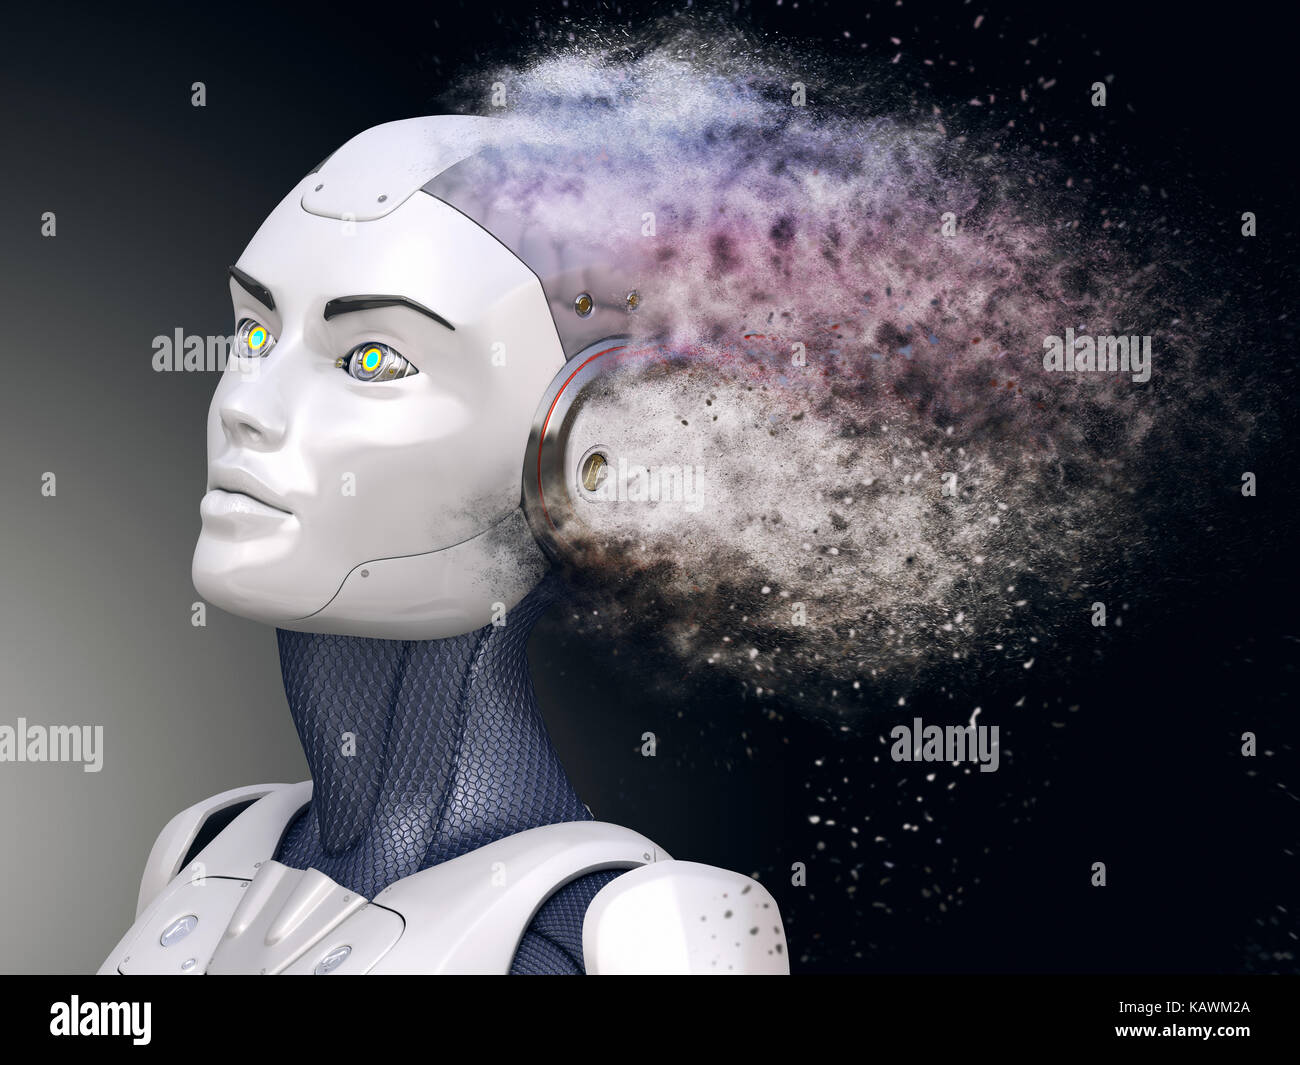 Cyborg with head shattered into dust. 3D illustration Stock Photo